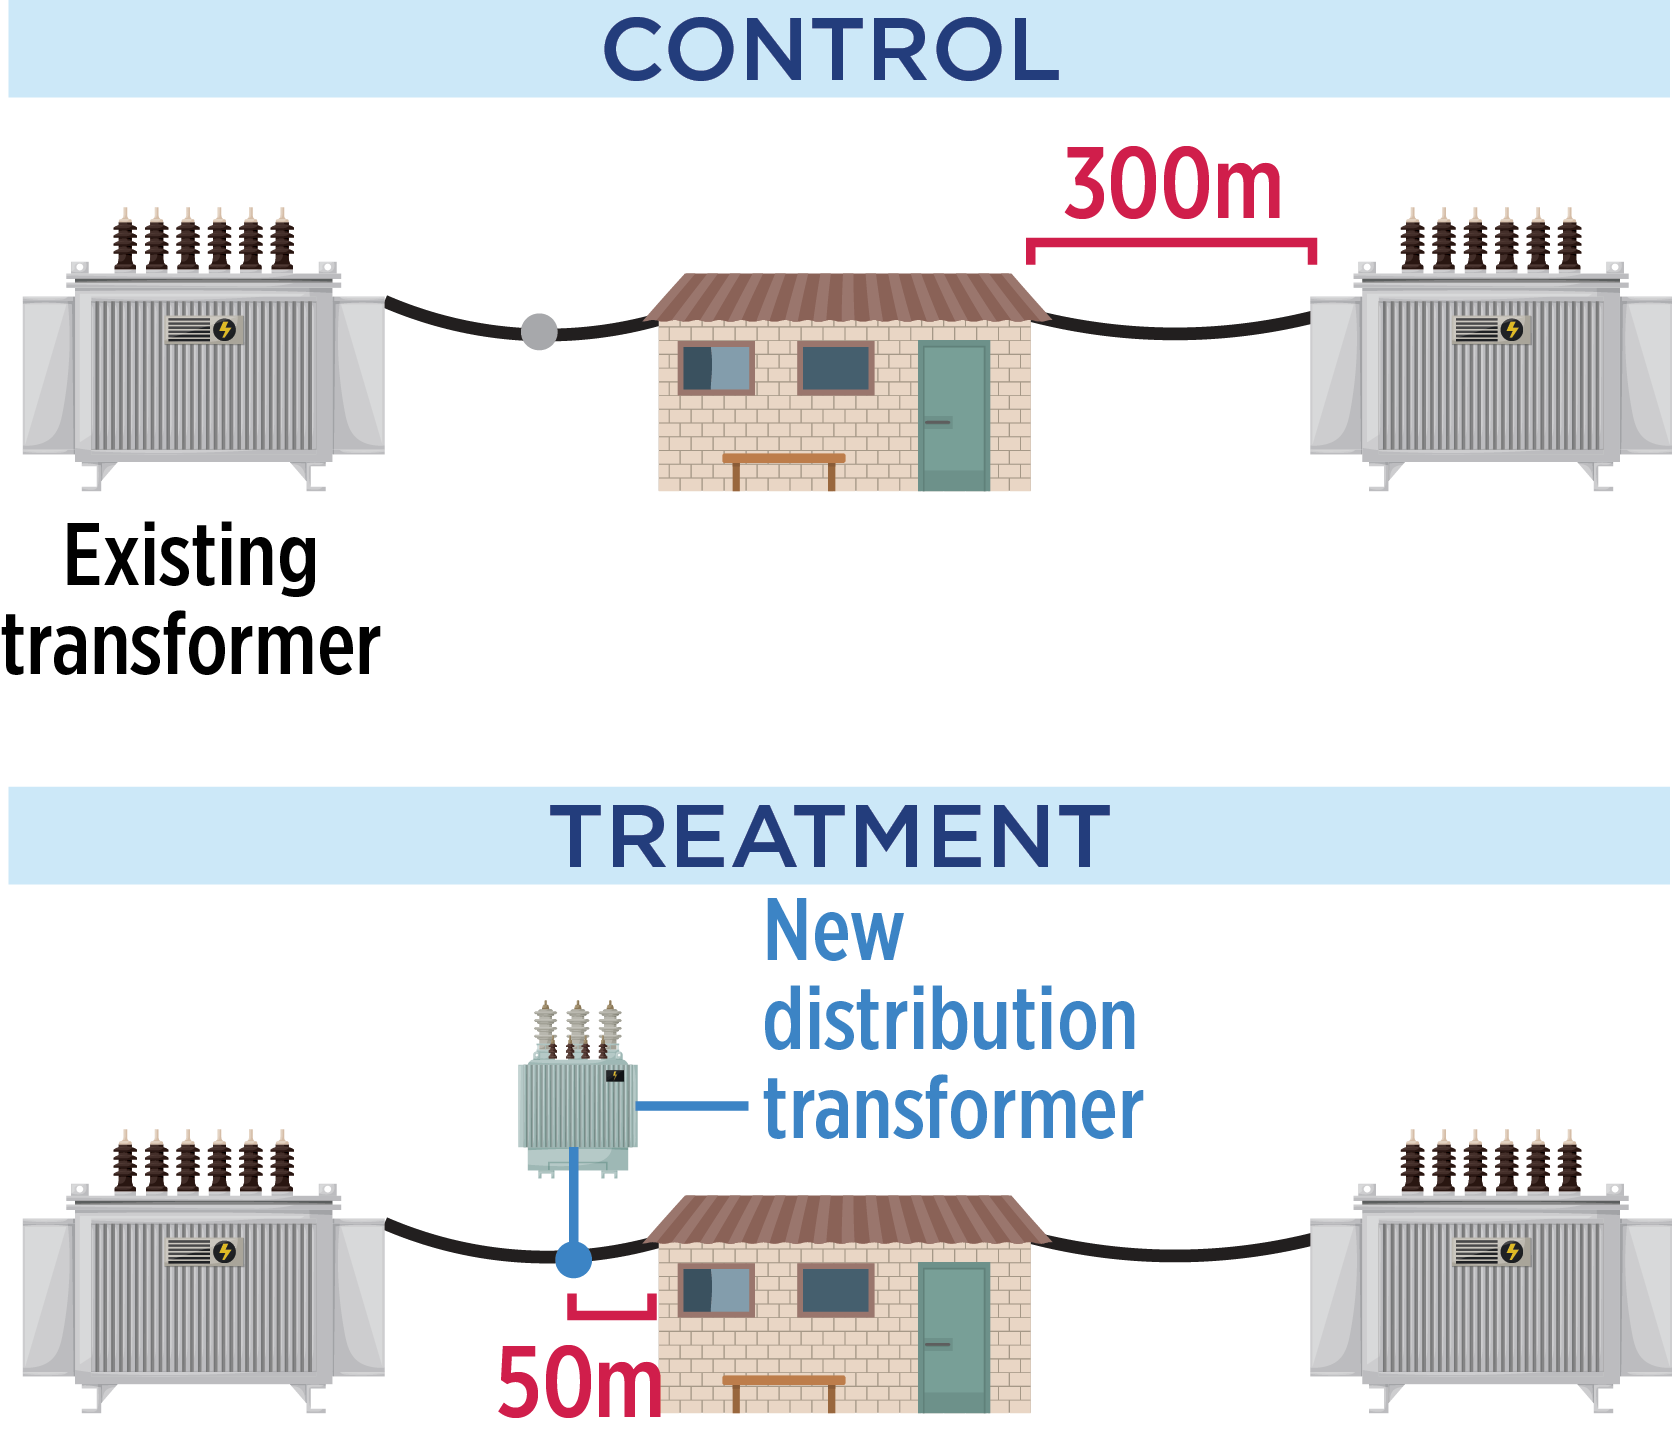 Diagram of control and treatment sites. In control sites, an existing transformer feeds electricity to households at a distance of around 300m. In treatment sites, new tranformers were constructed closer, around 50m from households.